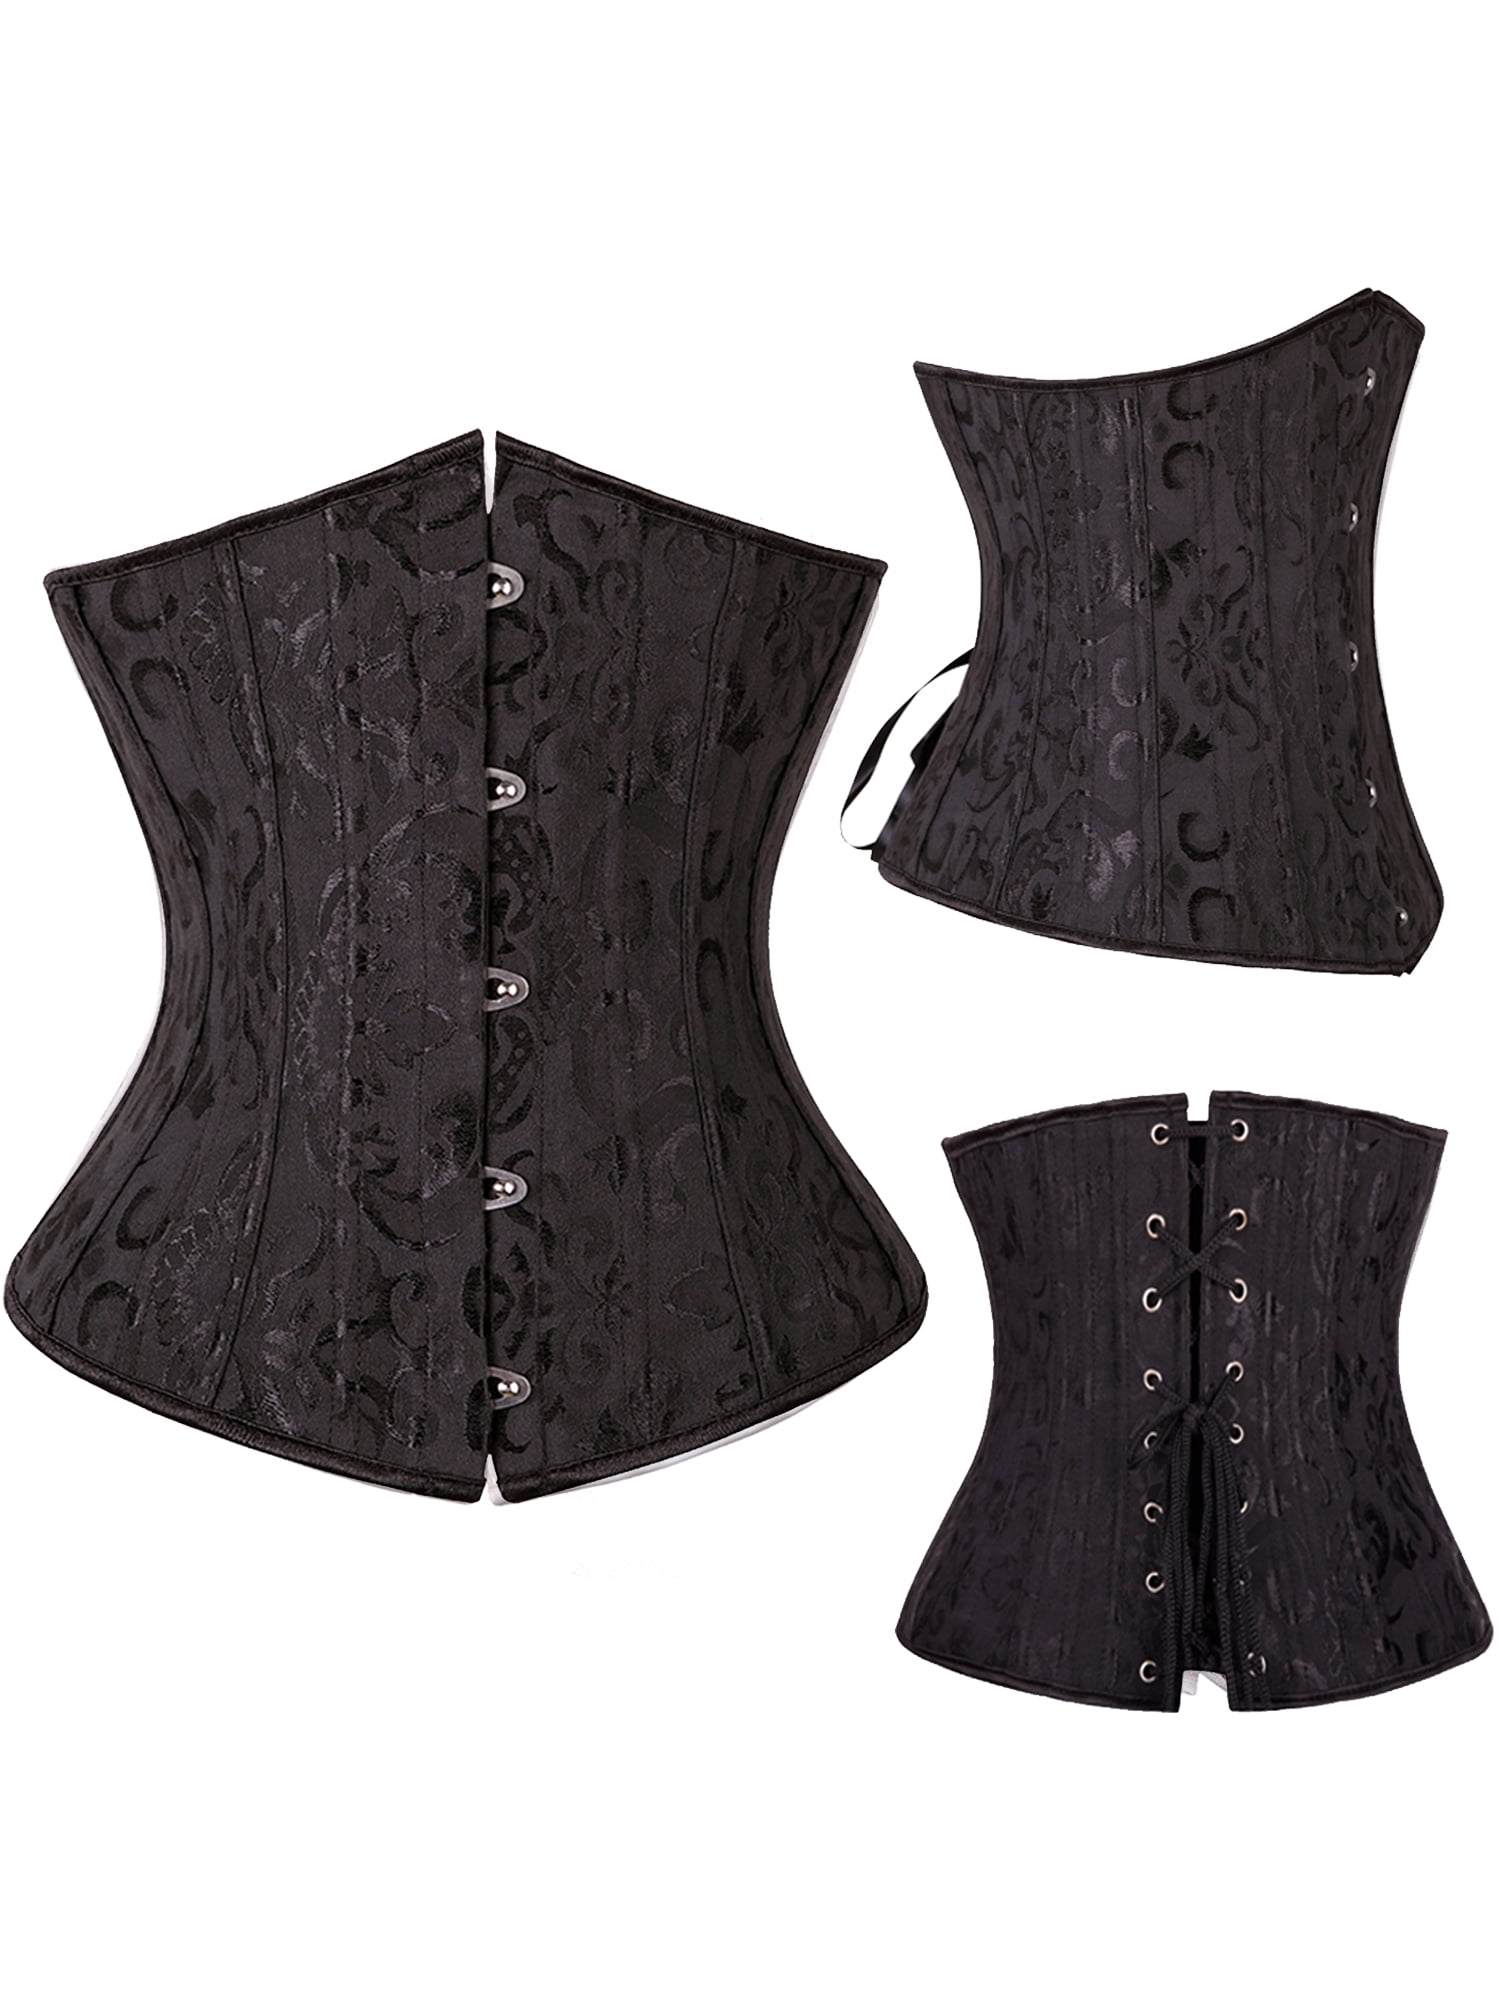 Spiral Steel Boned Corsets and Bustiers Underbust Floral Corsets Waist Trainer Cincher 